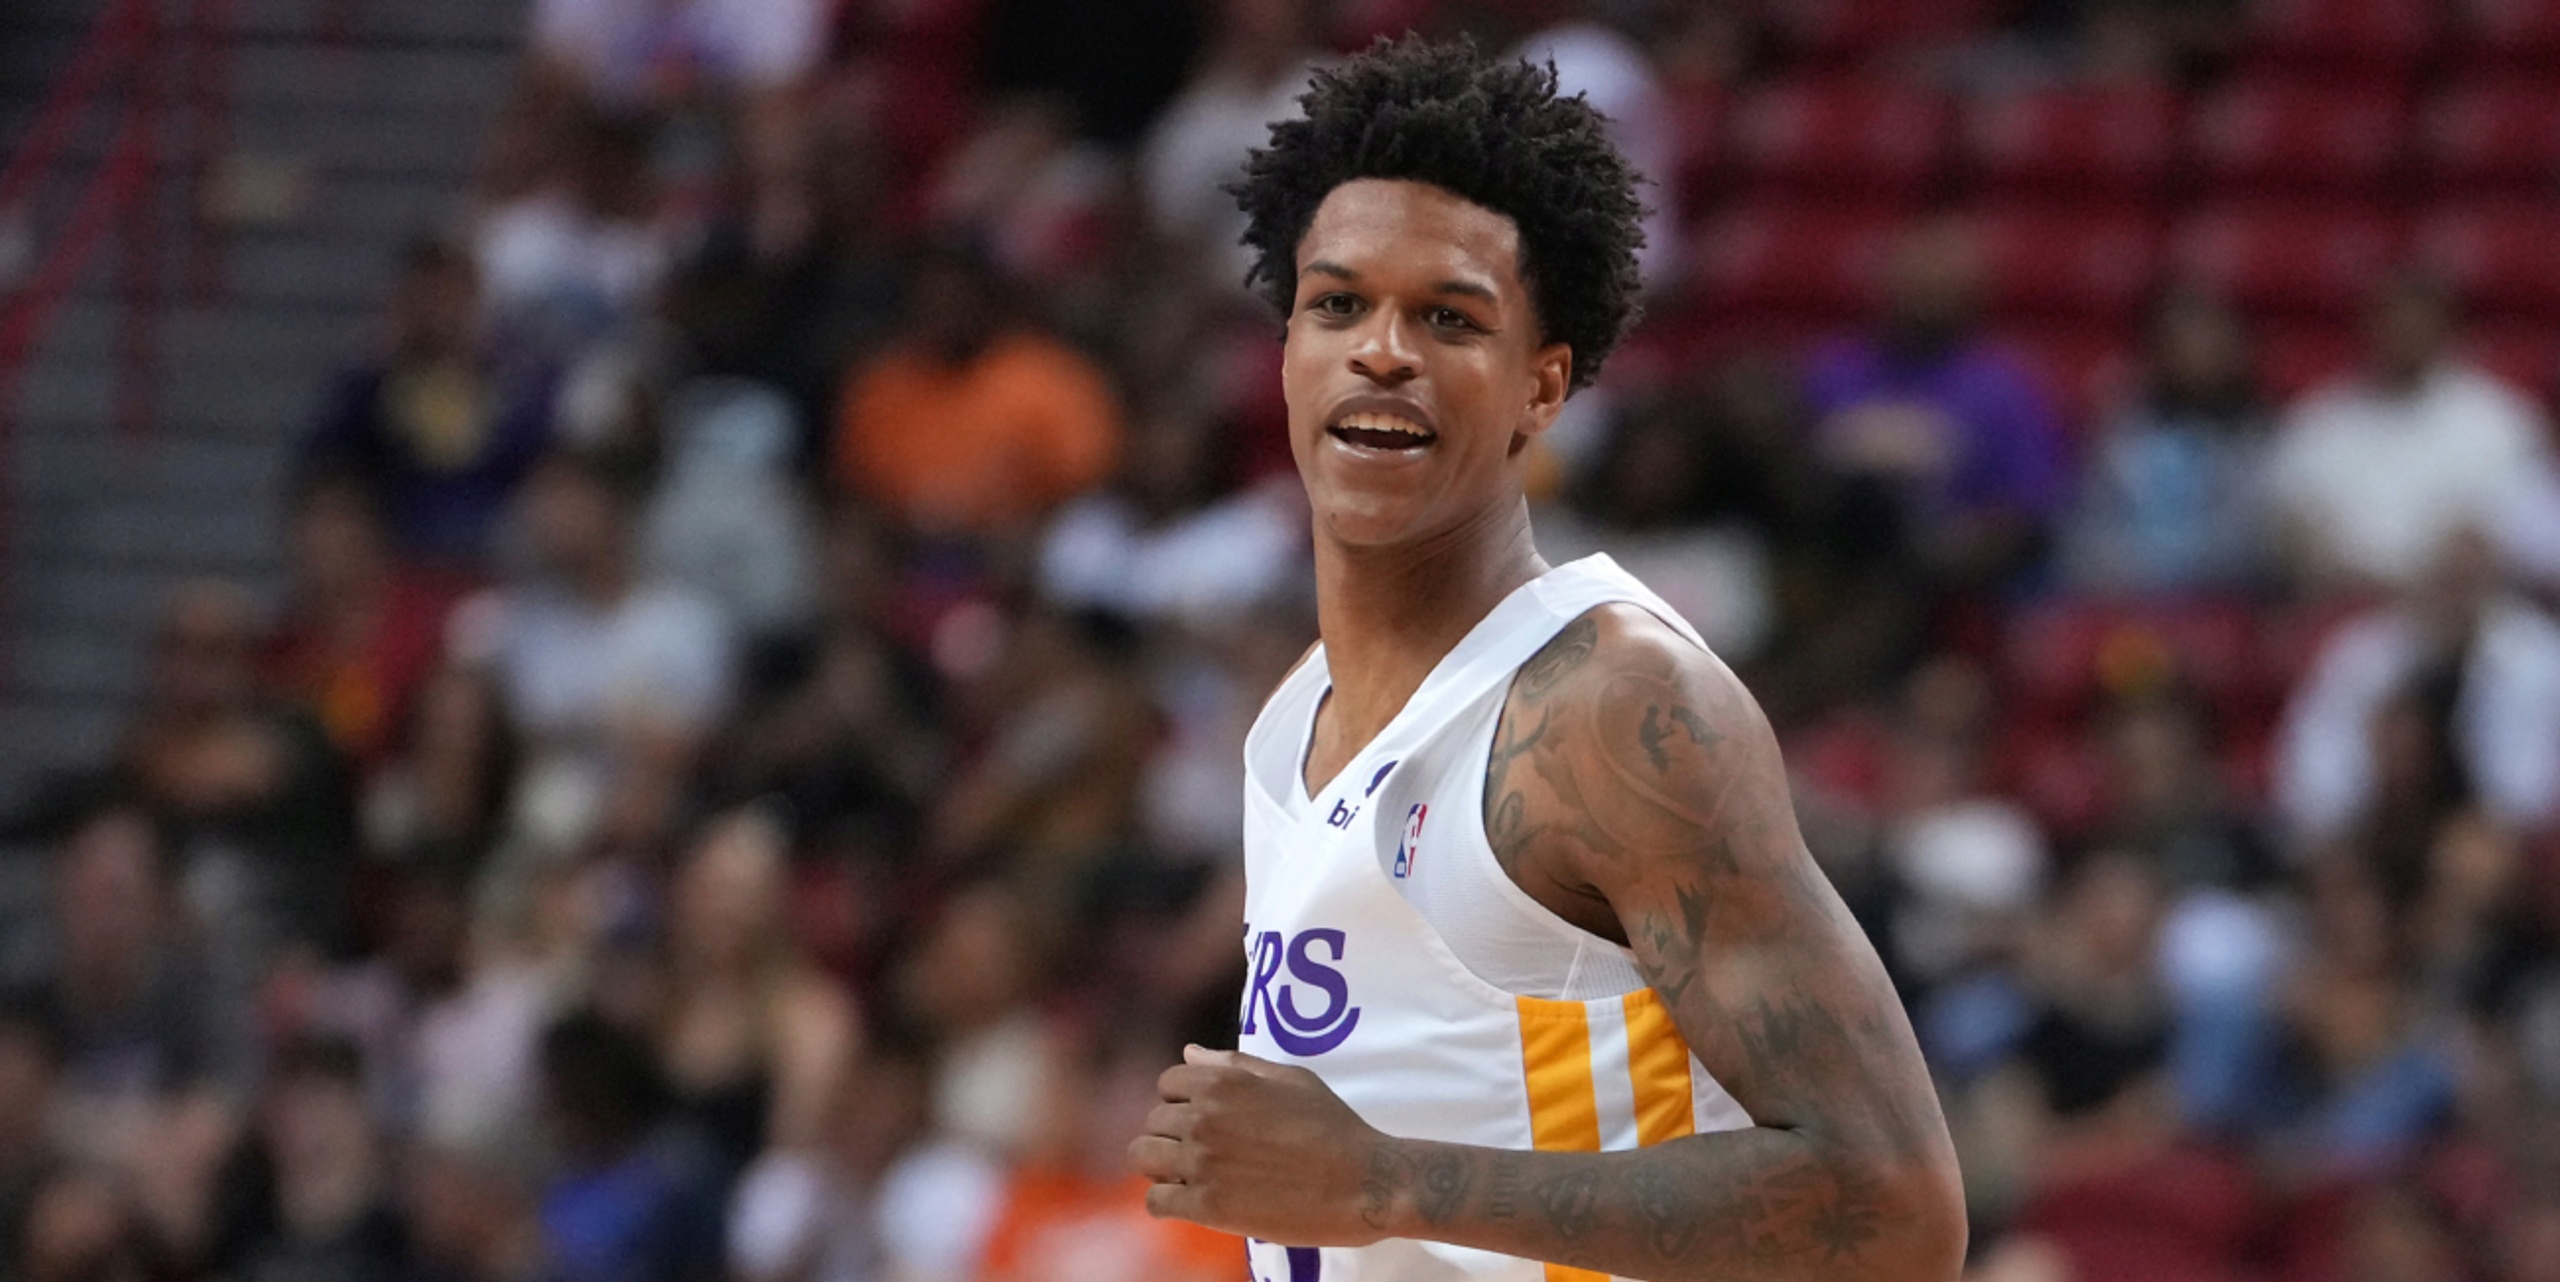 Shareef O'Neal signs with G League Ignite for 2022-23 season